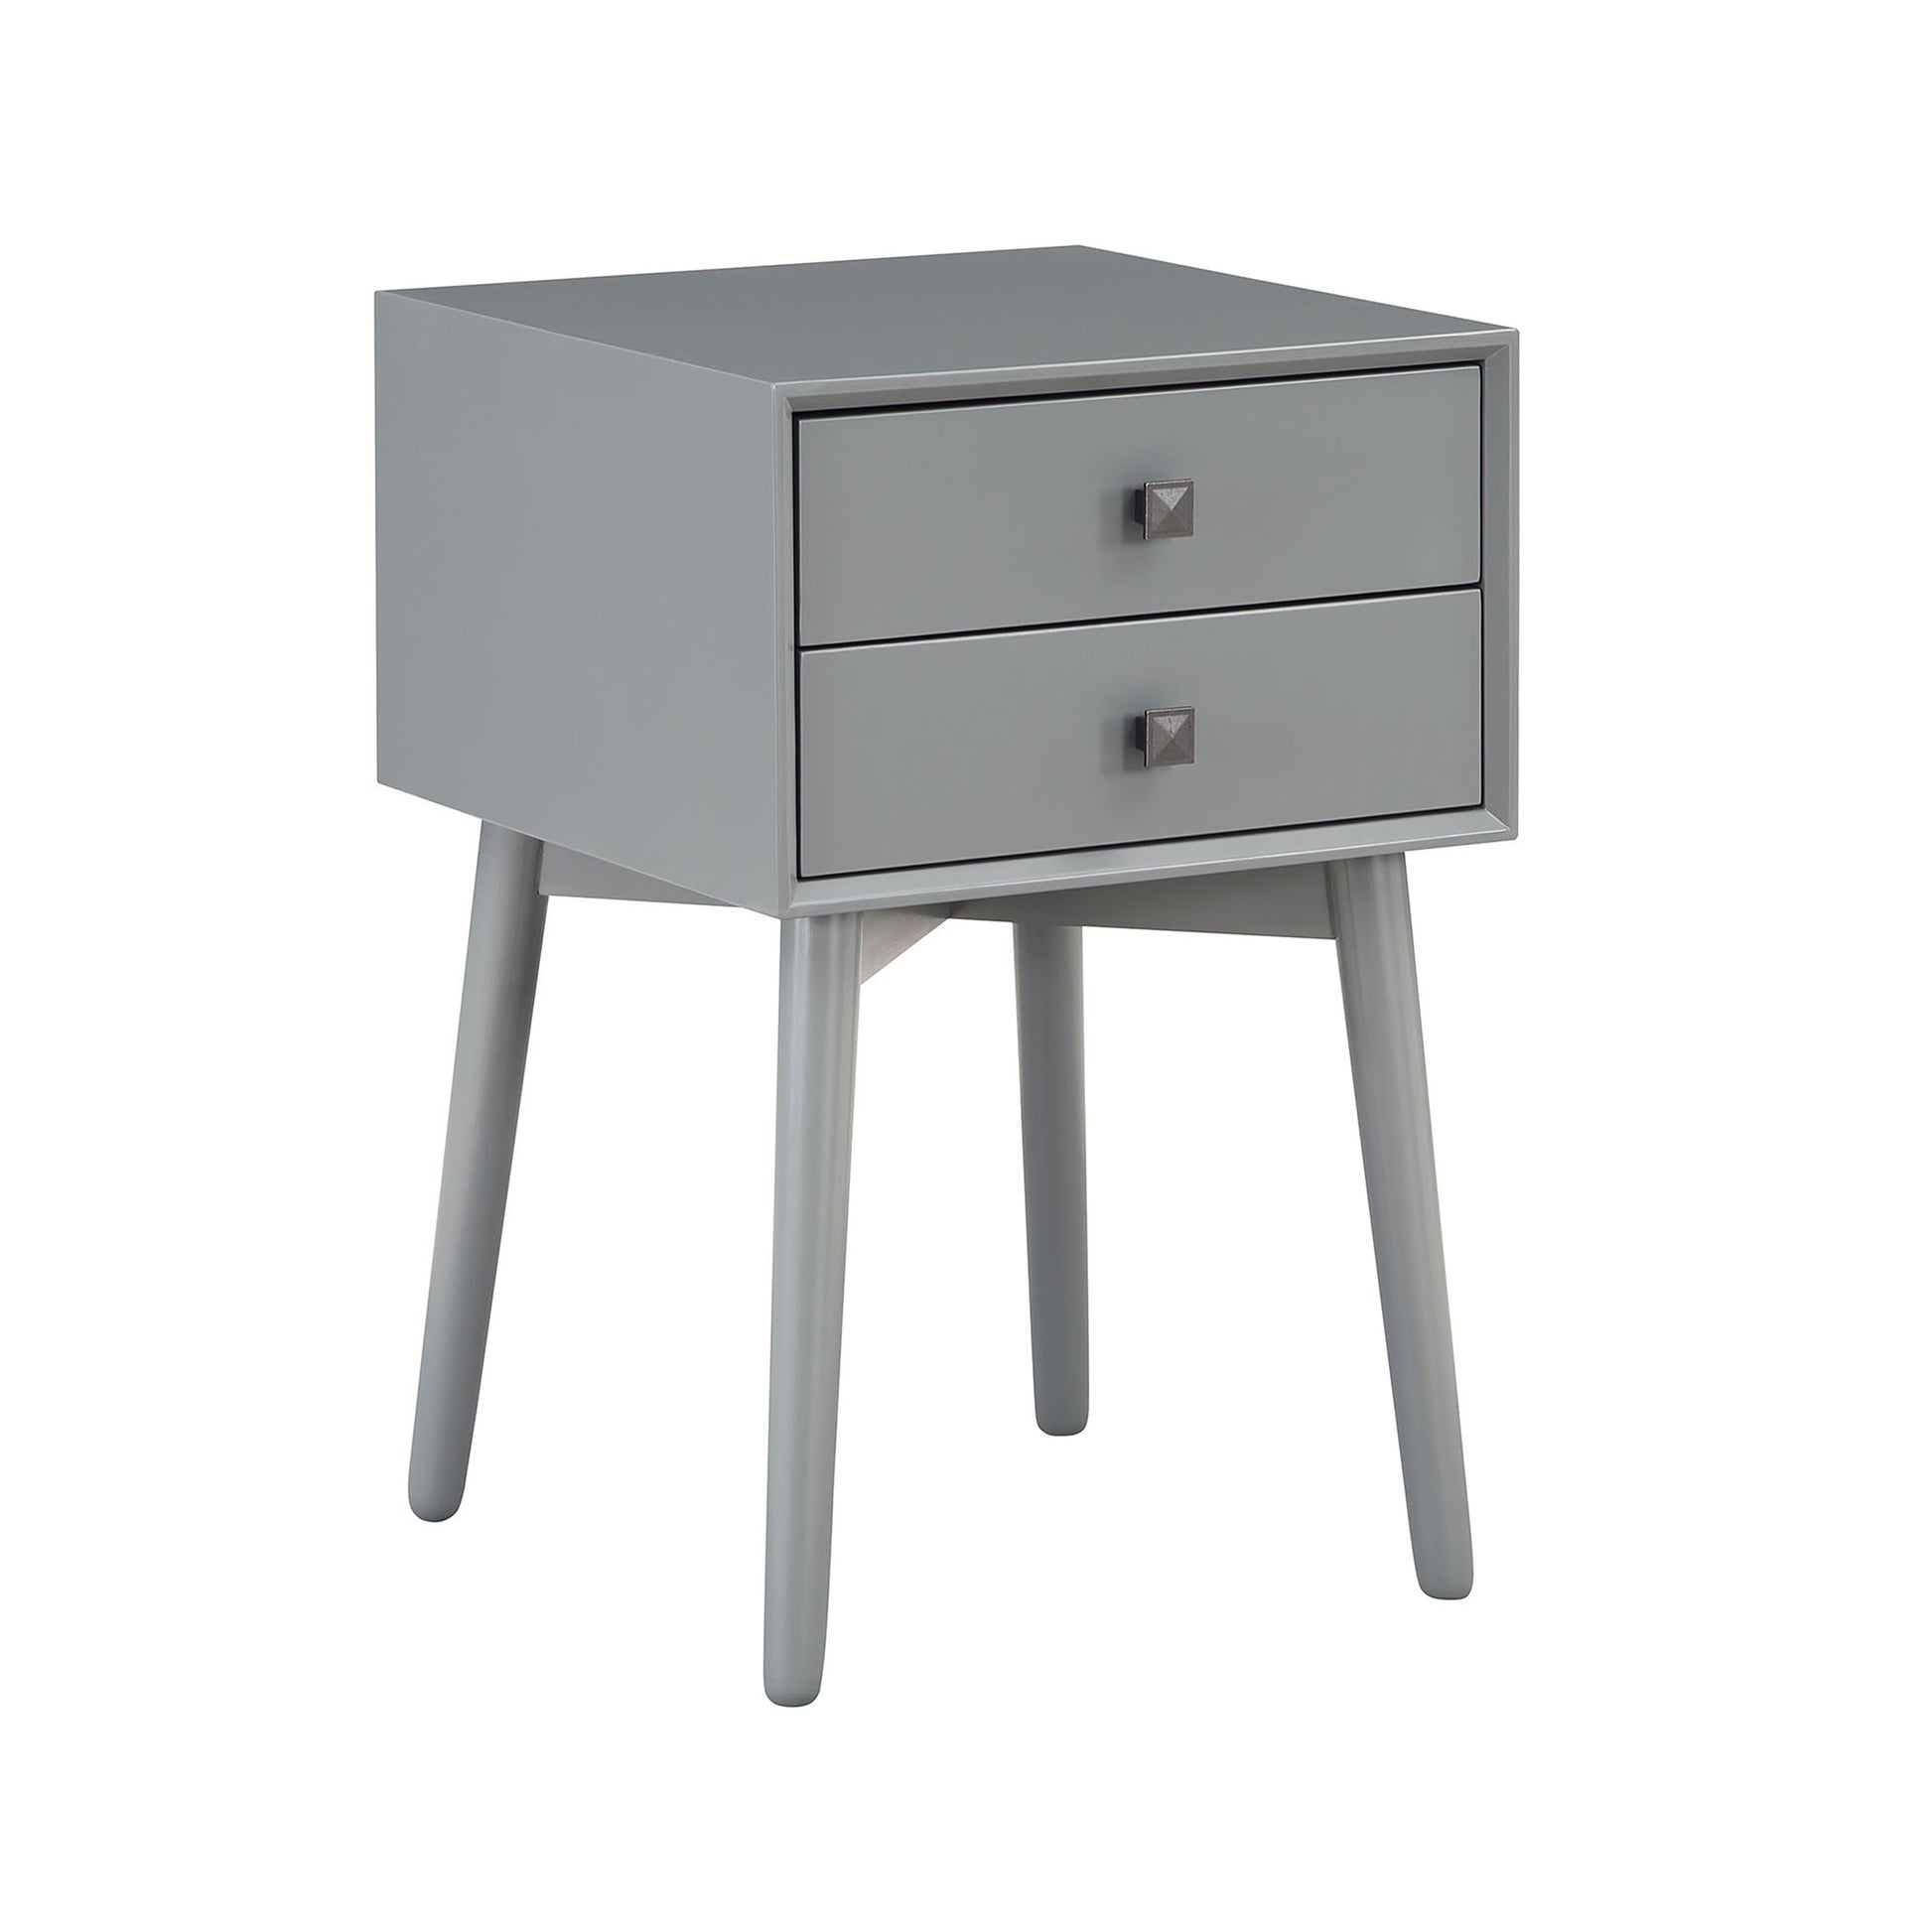 Right angled modern gray two-drawer compact nightstand with splayed legs on a white background